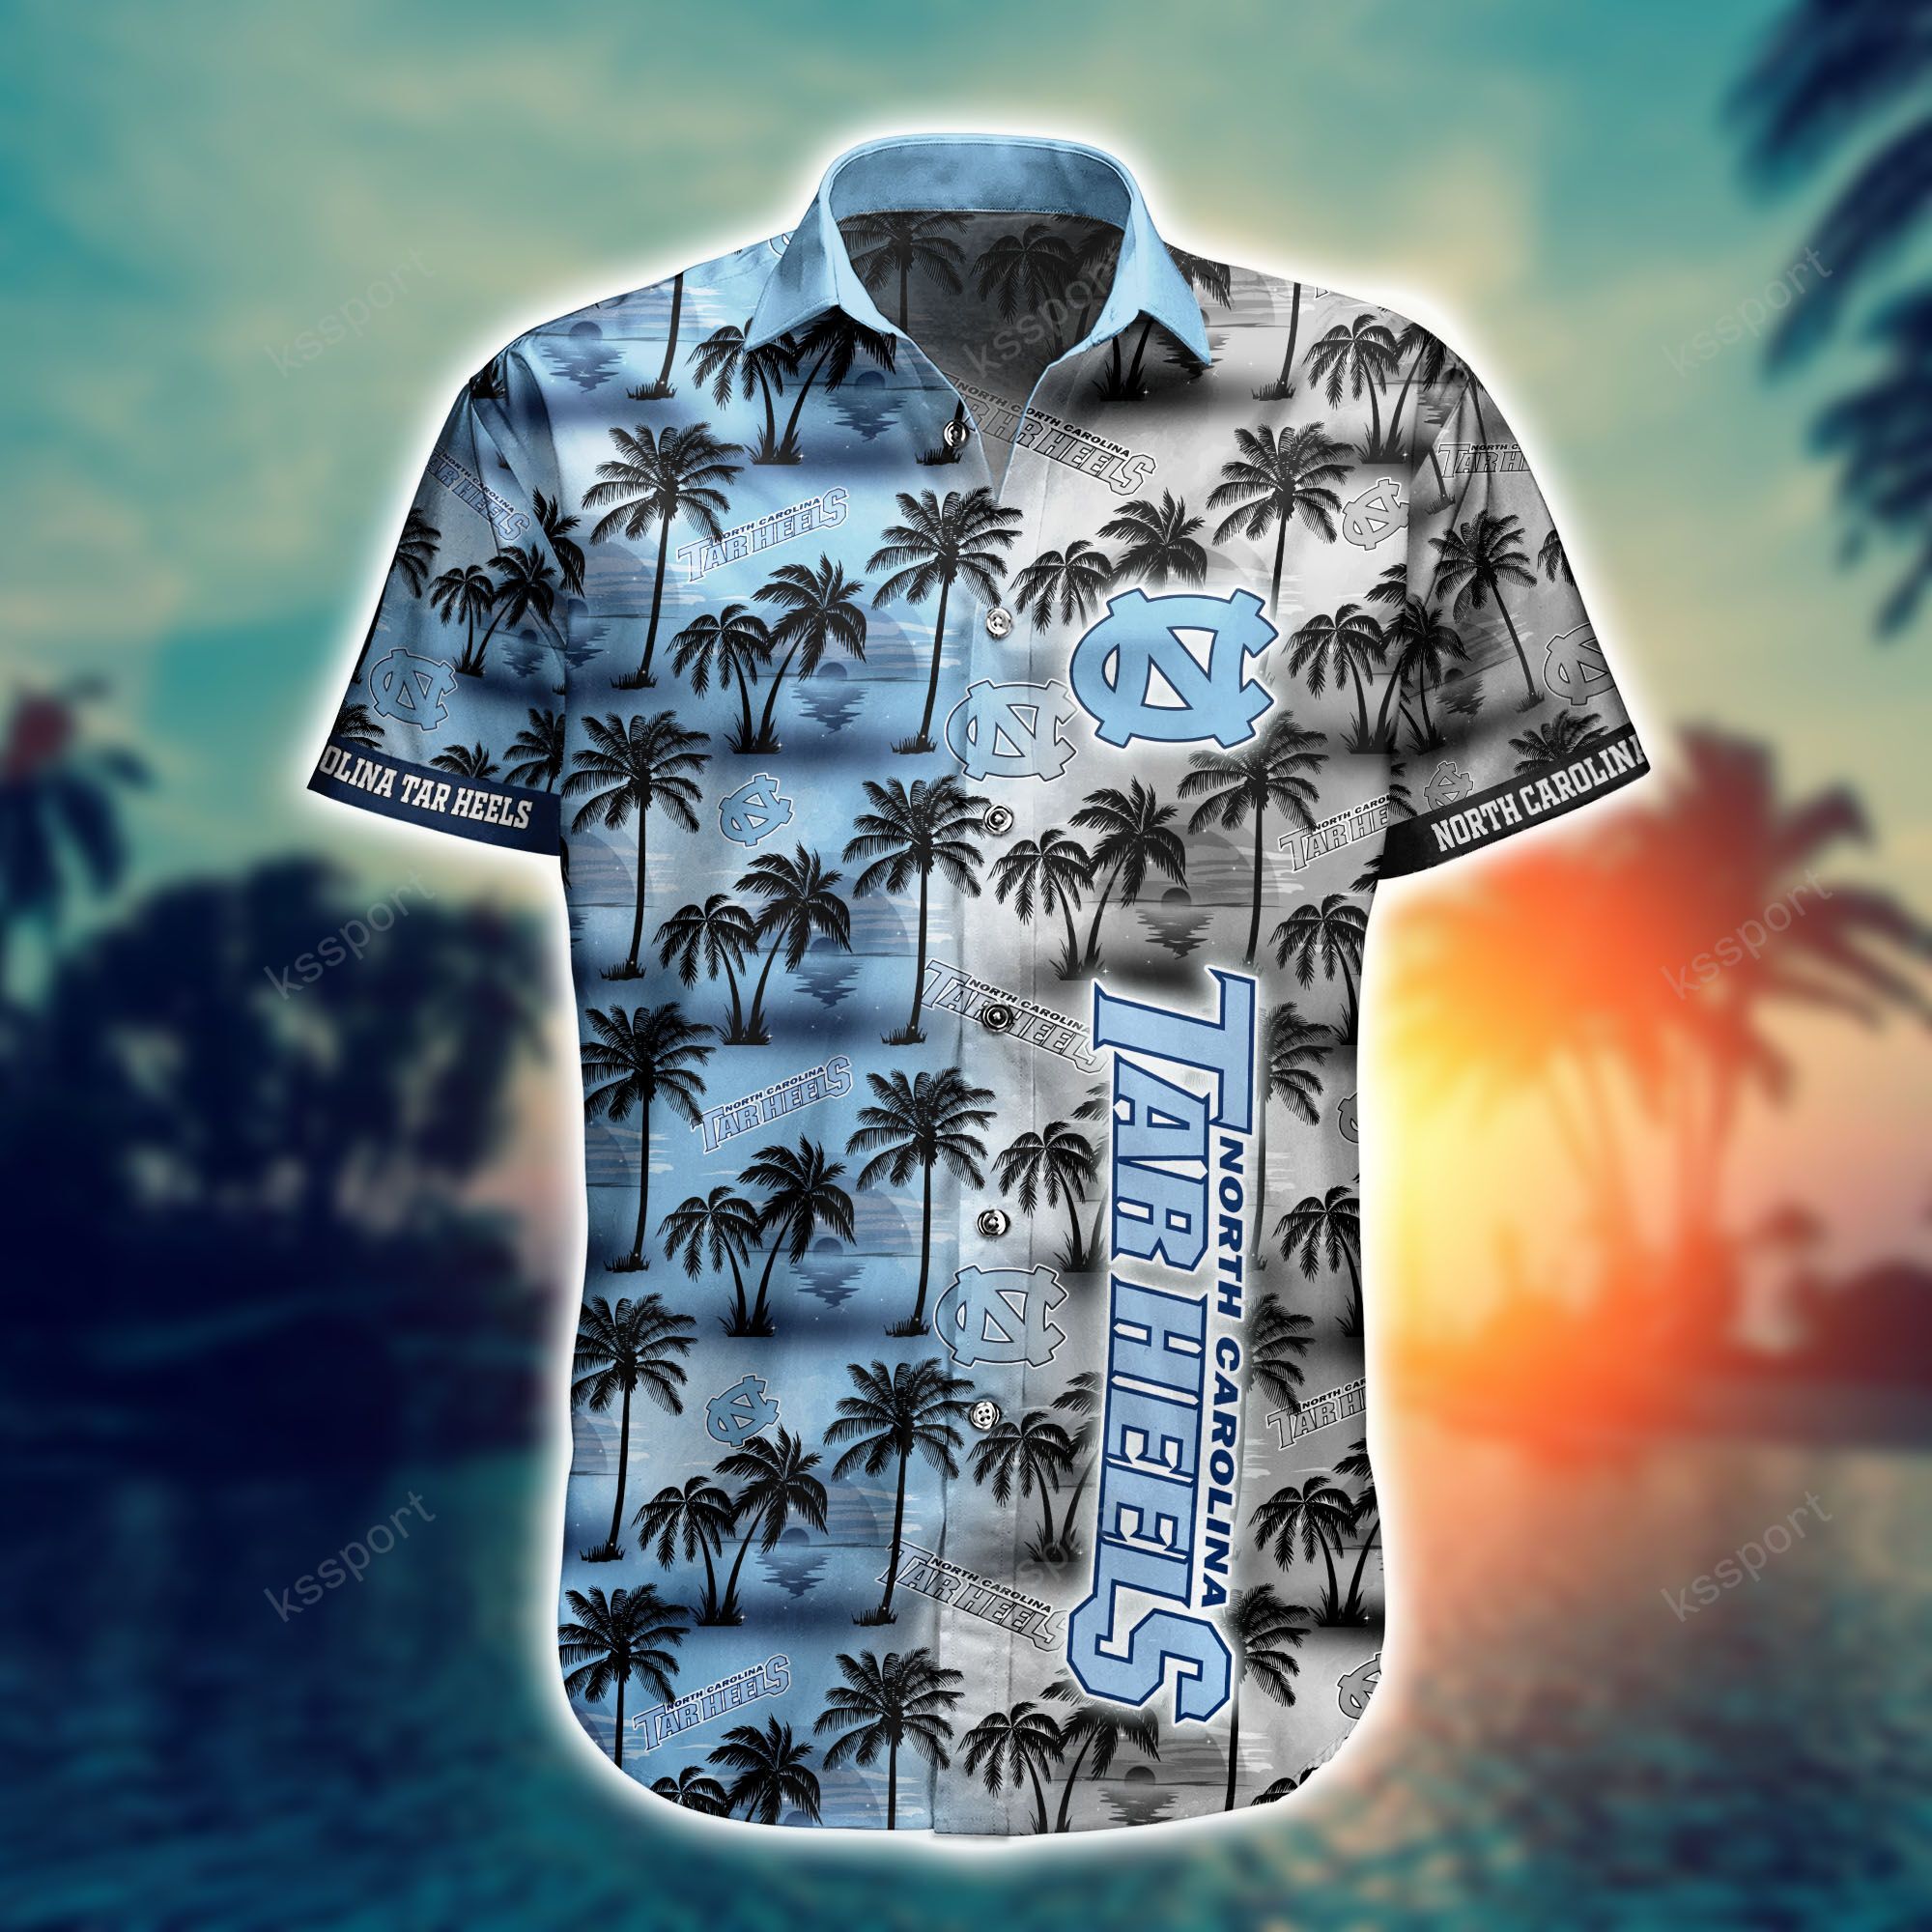 Top cool Hawaiian shirt 2022 - Make sure you get yours today before they run out! 157